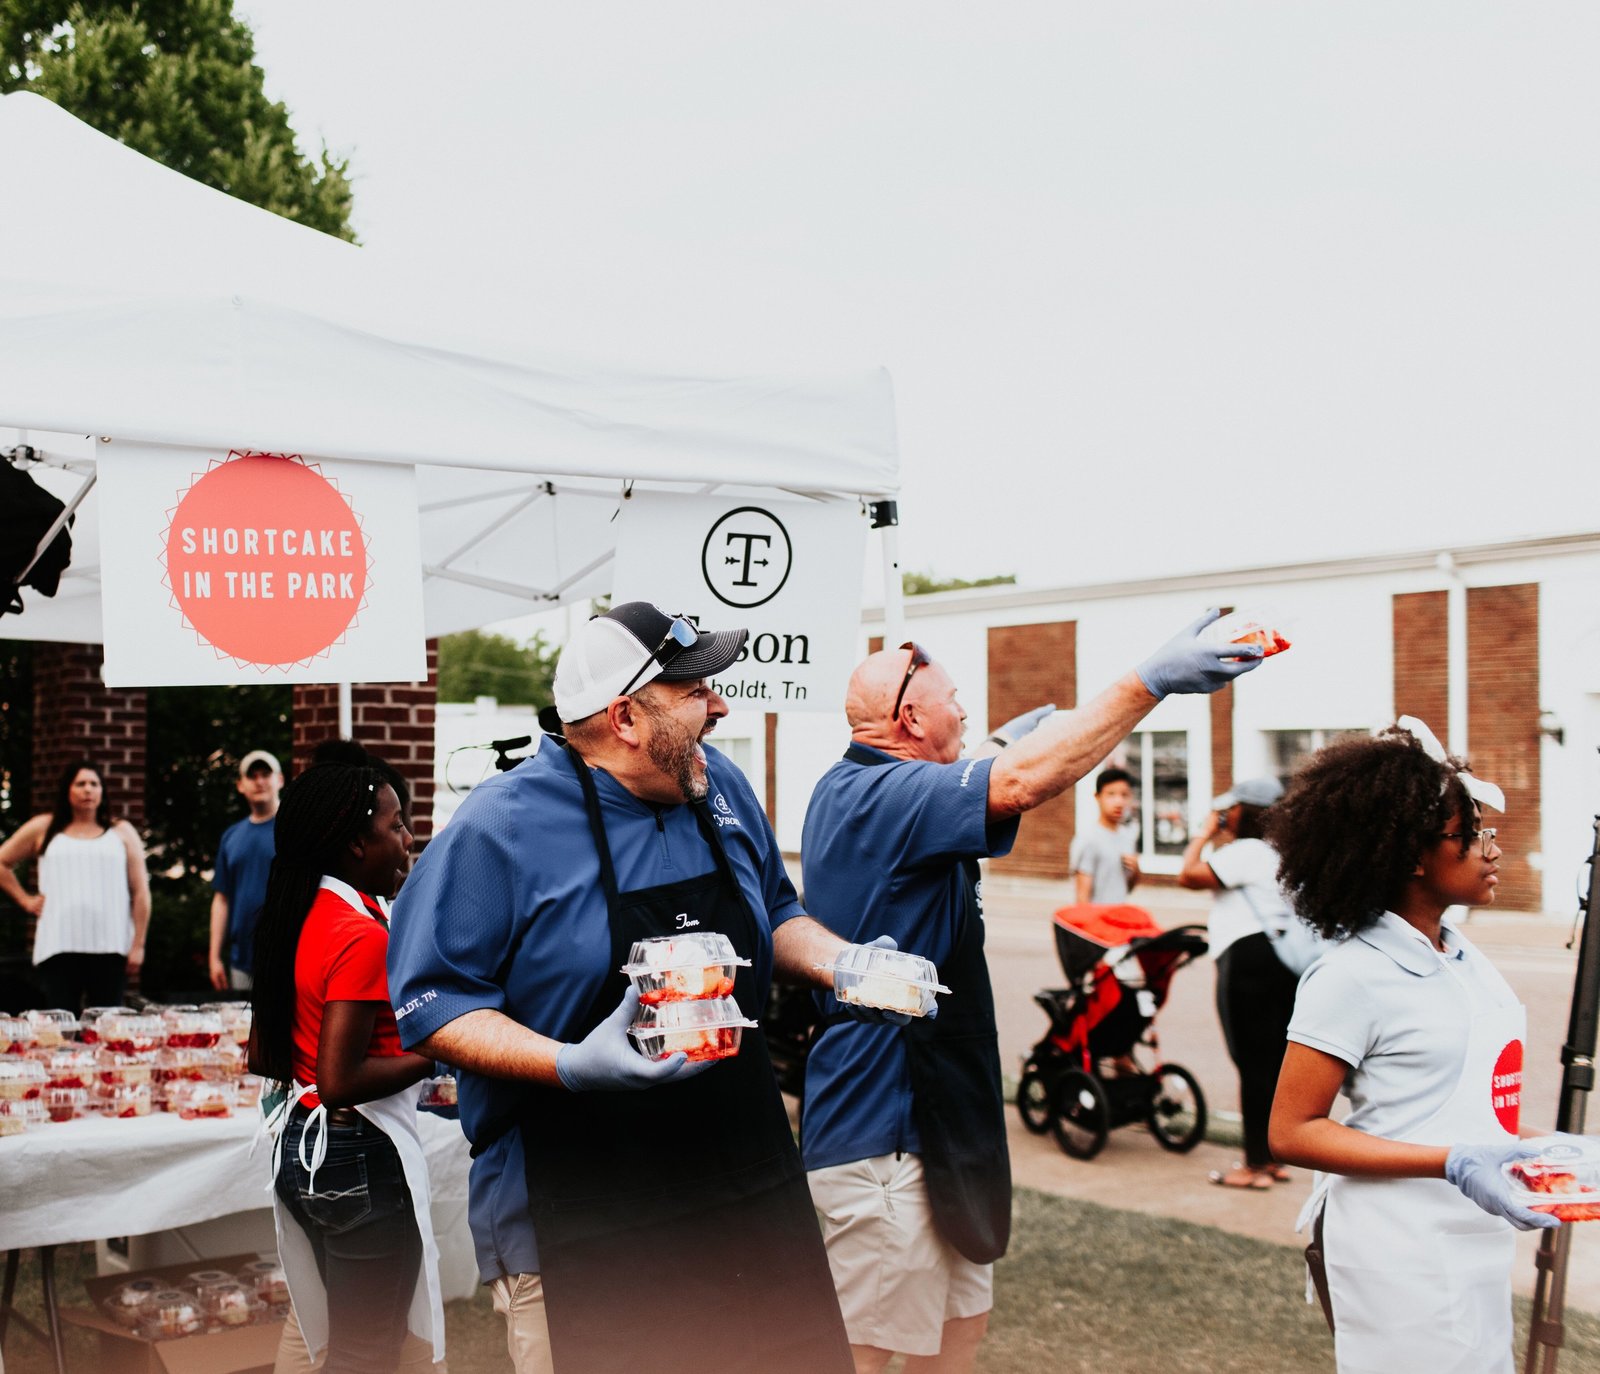 2019 West Tennessee Strawberry Festival - Shortcake in the park - 38